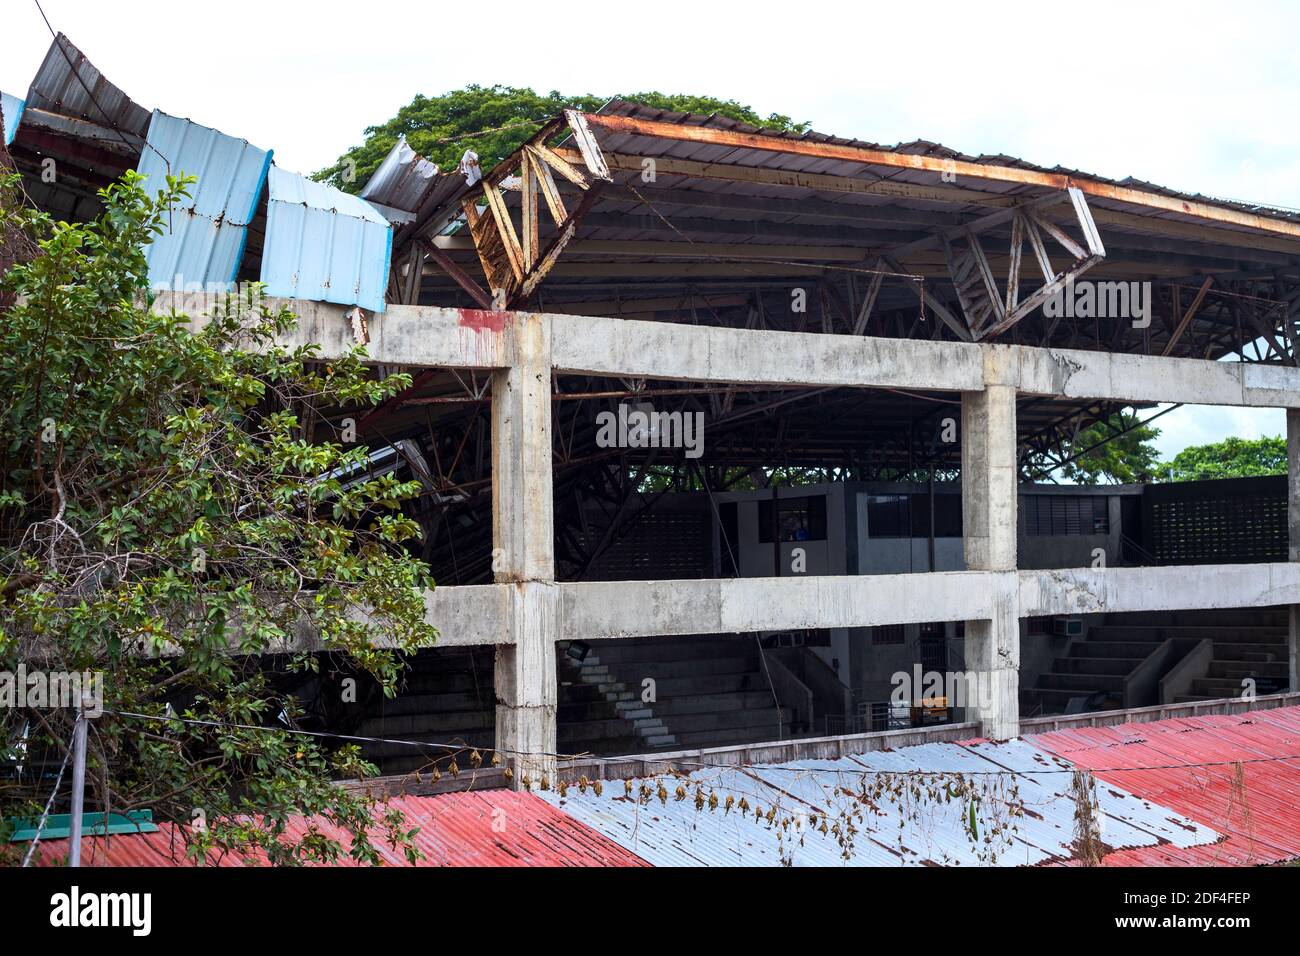 Ruined sport stadium after typhoon, South Asia natural disaster. Earthquake or storm impact on small town economy. Ruined building by severe weather. Stock Photo